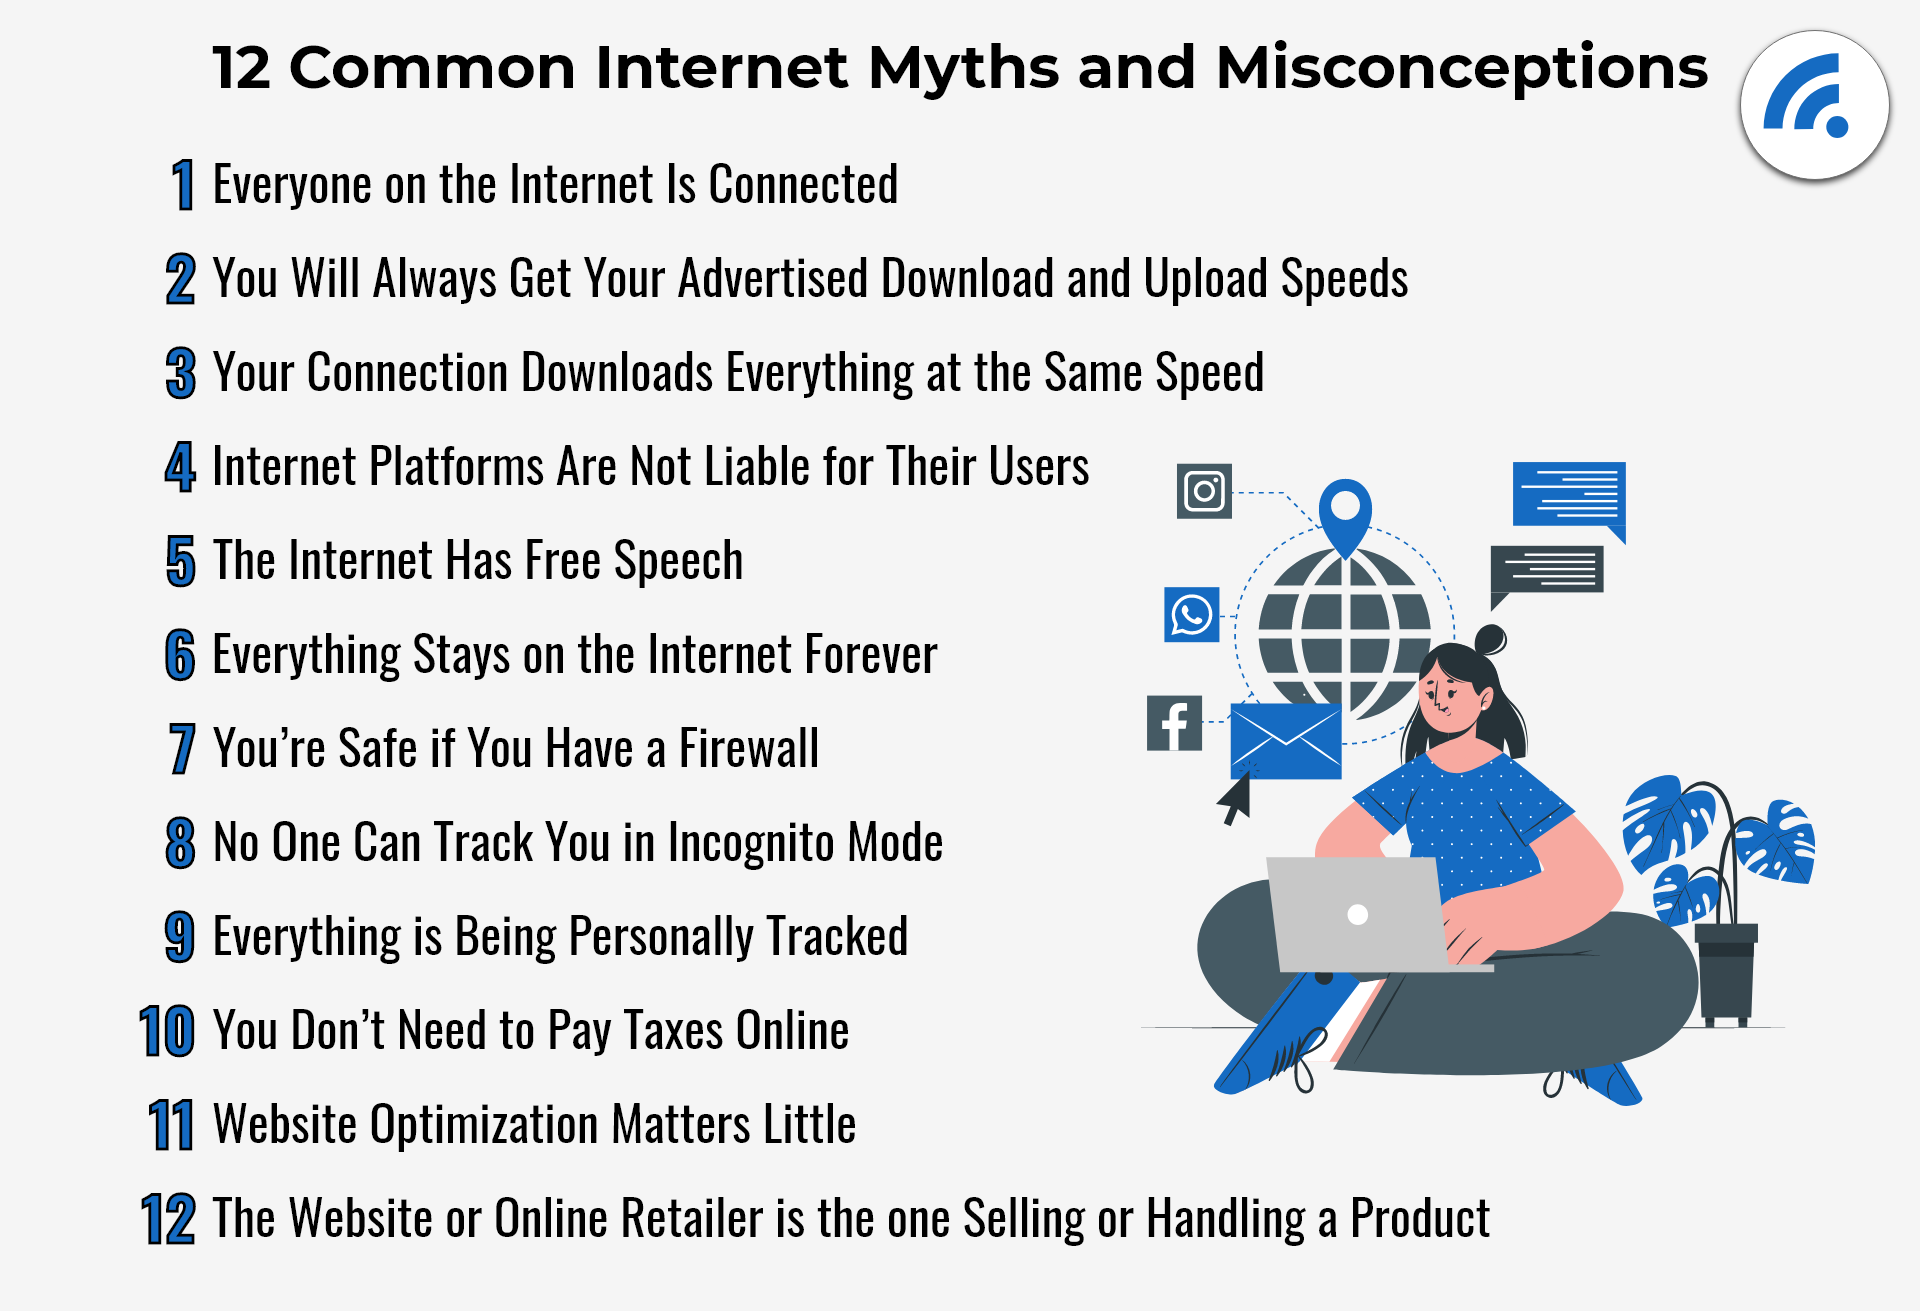 12 Common Internet Myths And Misconceptions